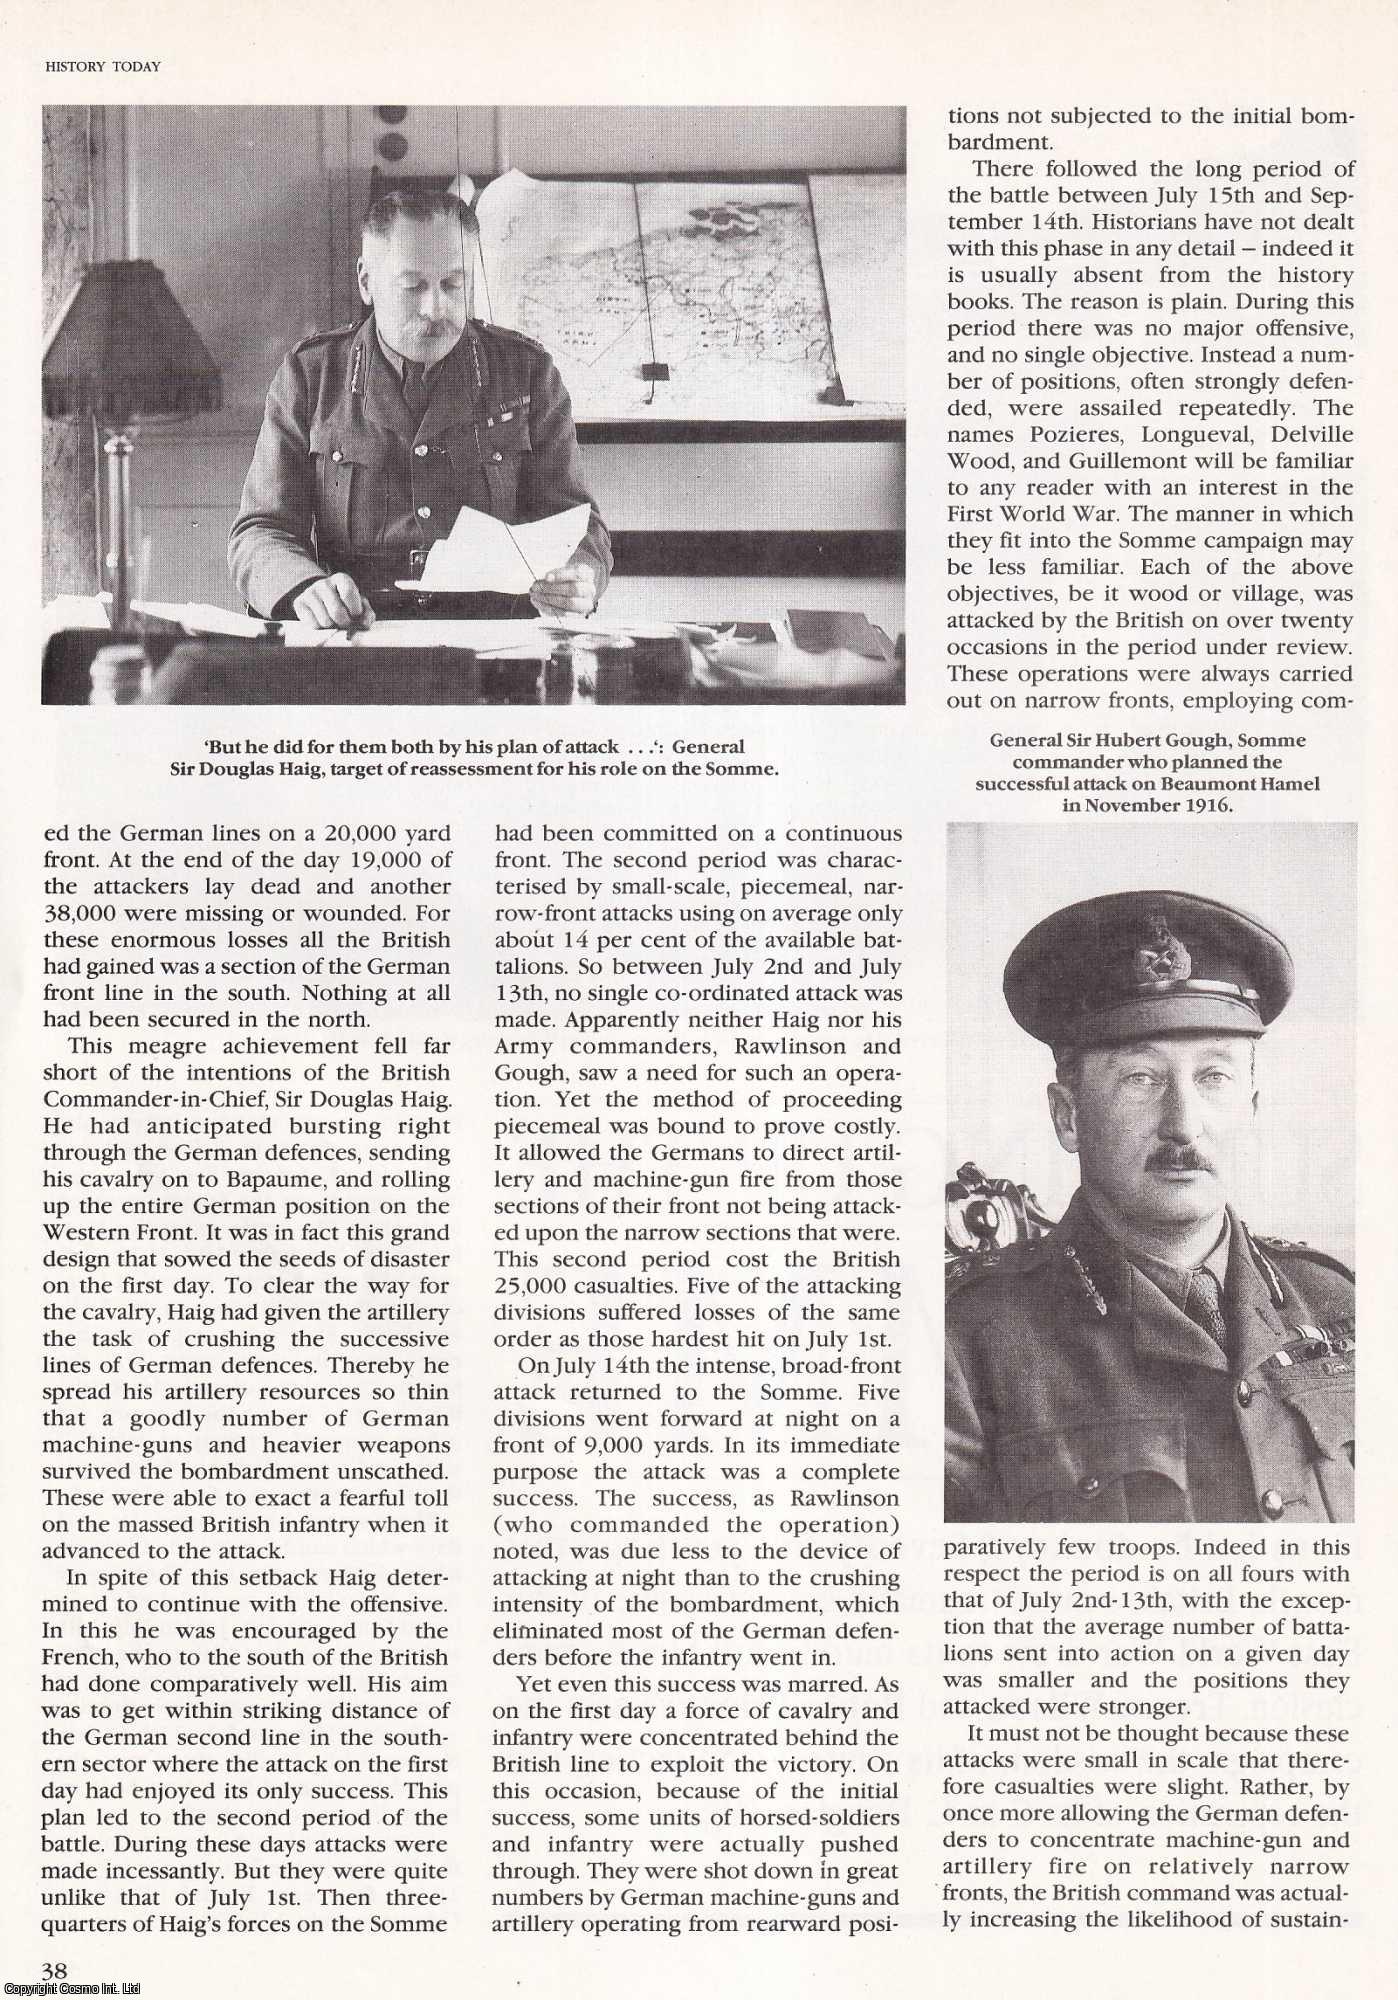 Trevor Wilson and Robin Prior - Summing Up the Somme. An original article from History Today, 1991.